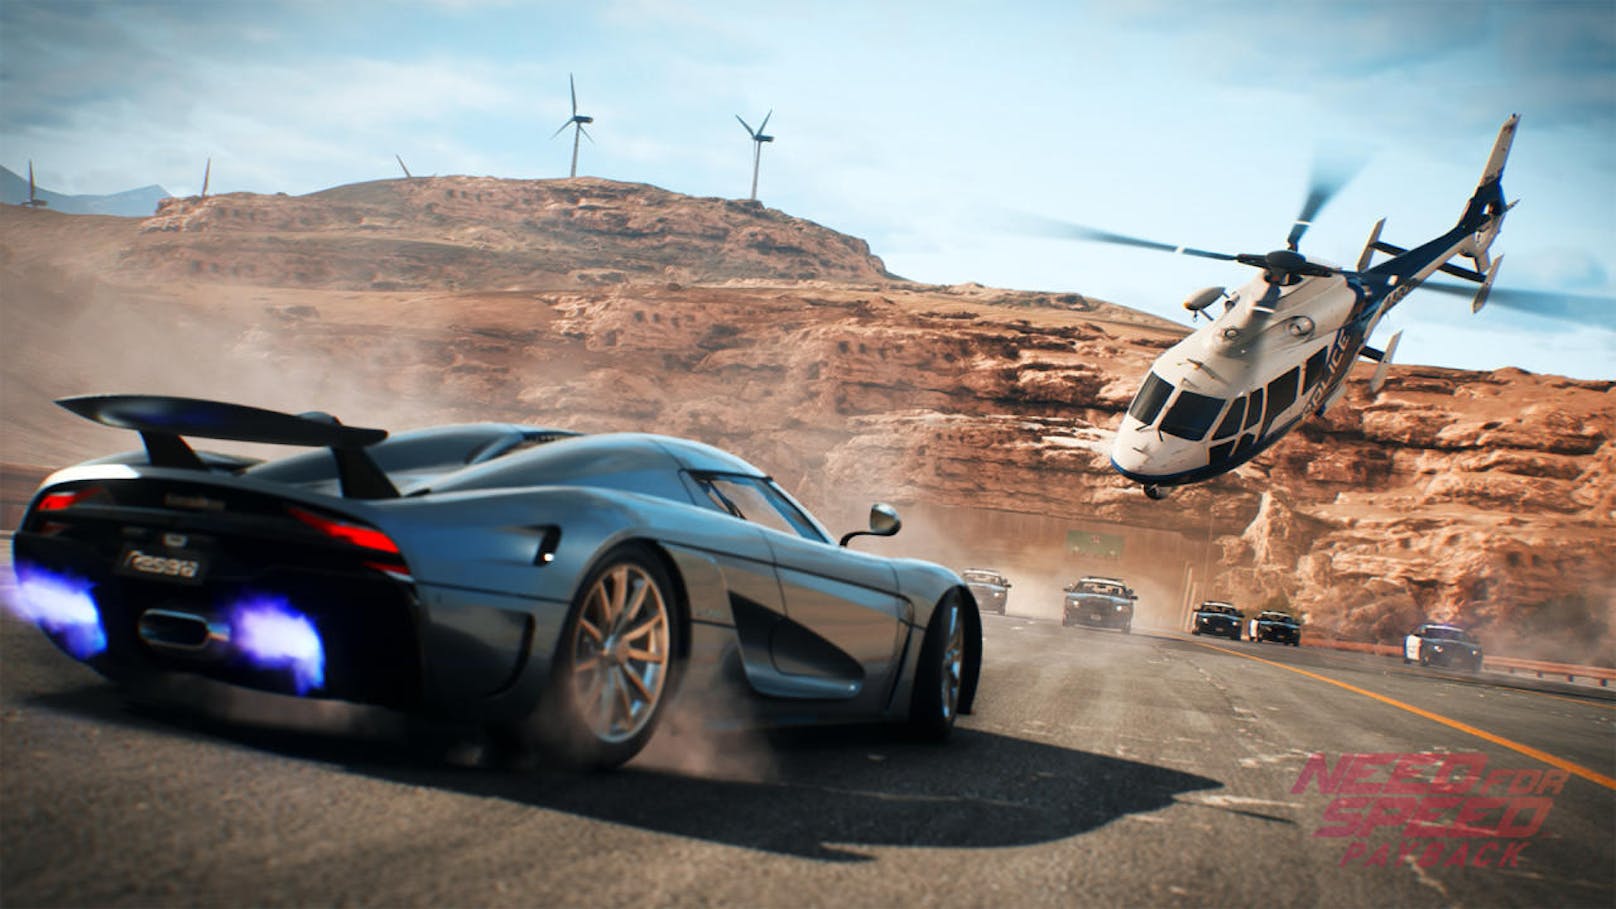  <a href="https://www.heute.at/digital/games/story/Need-for-Speed-Payback-im-Test--Ausgebremst--58317655" target="_blank">Need for Speed Payback</a>